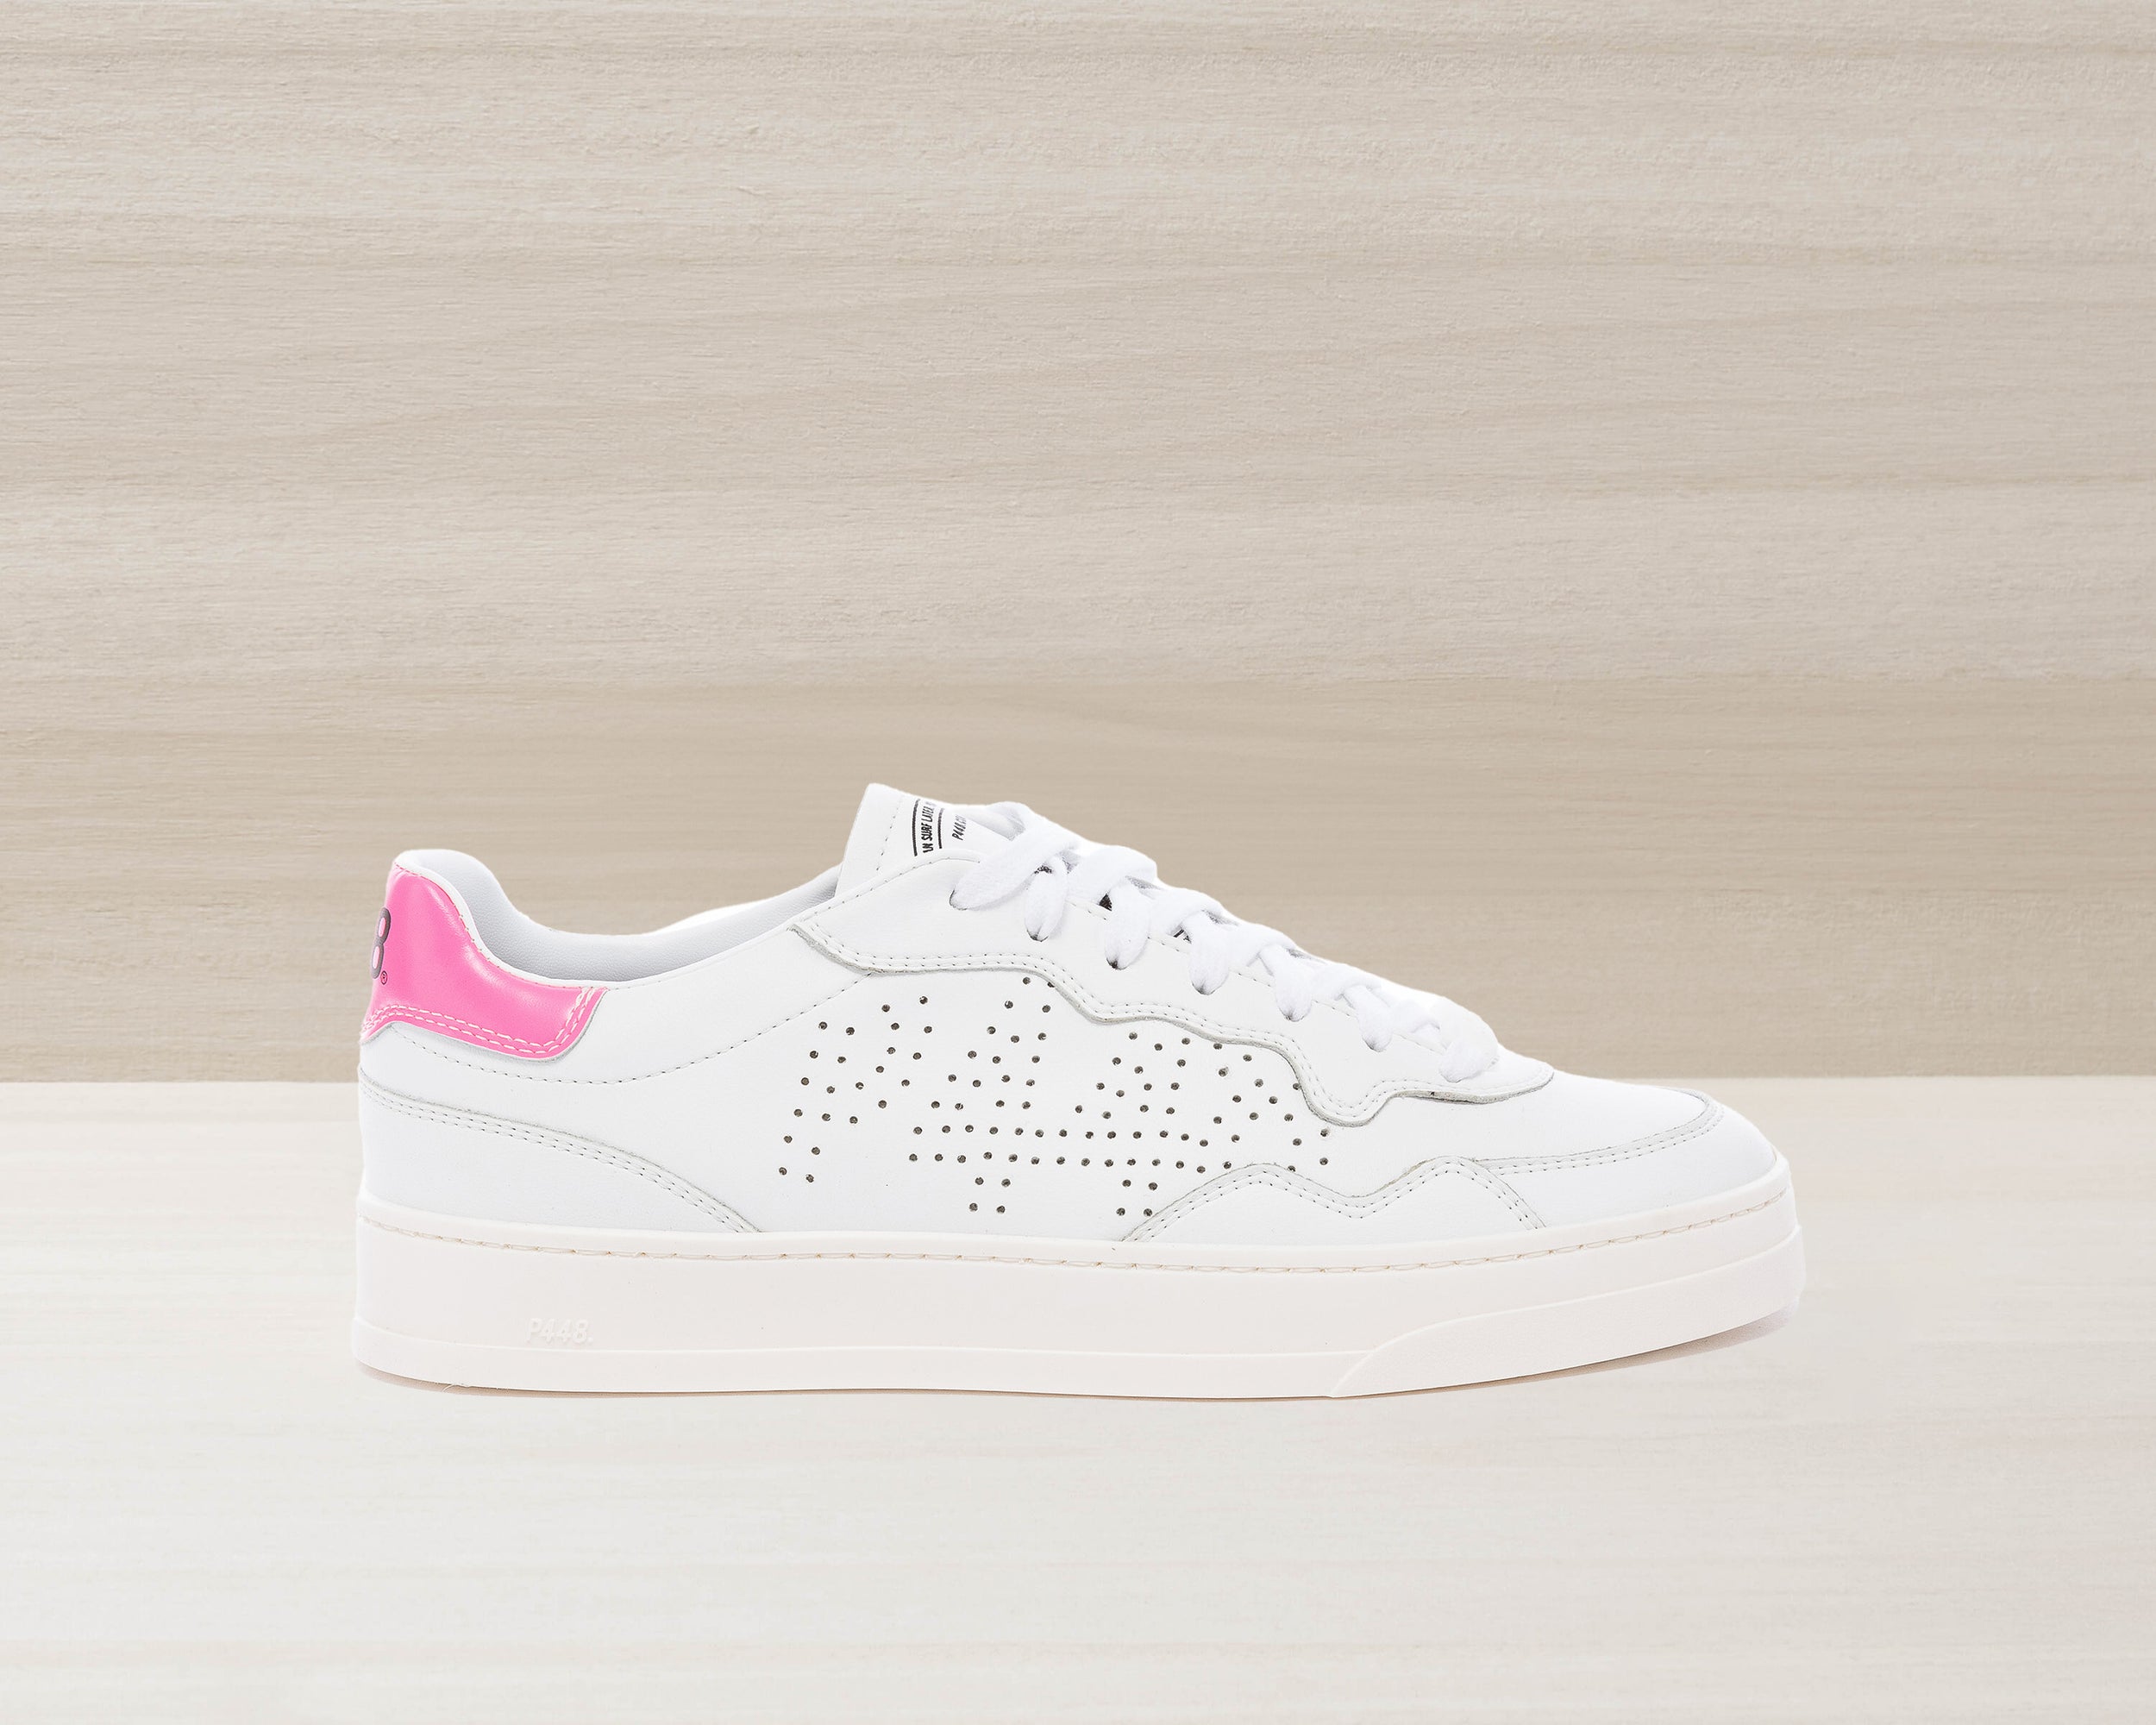 Bali Recycled White/Pink